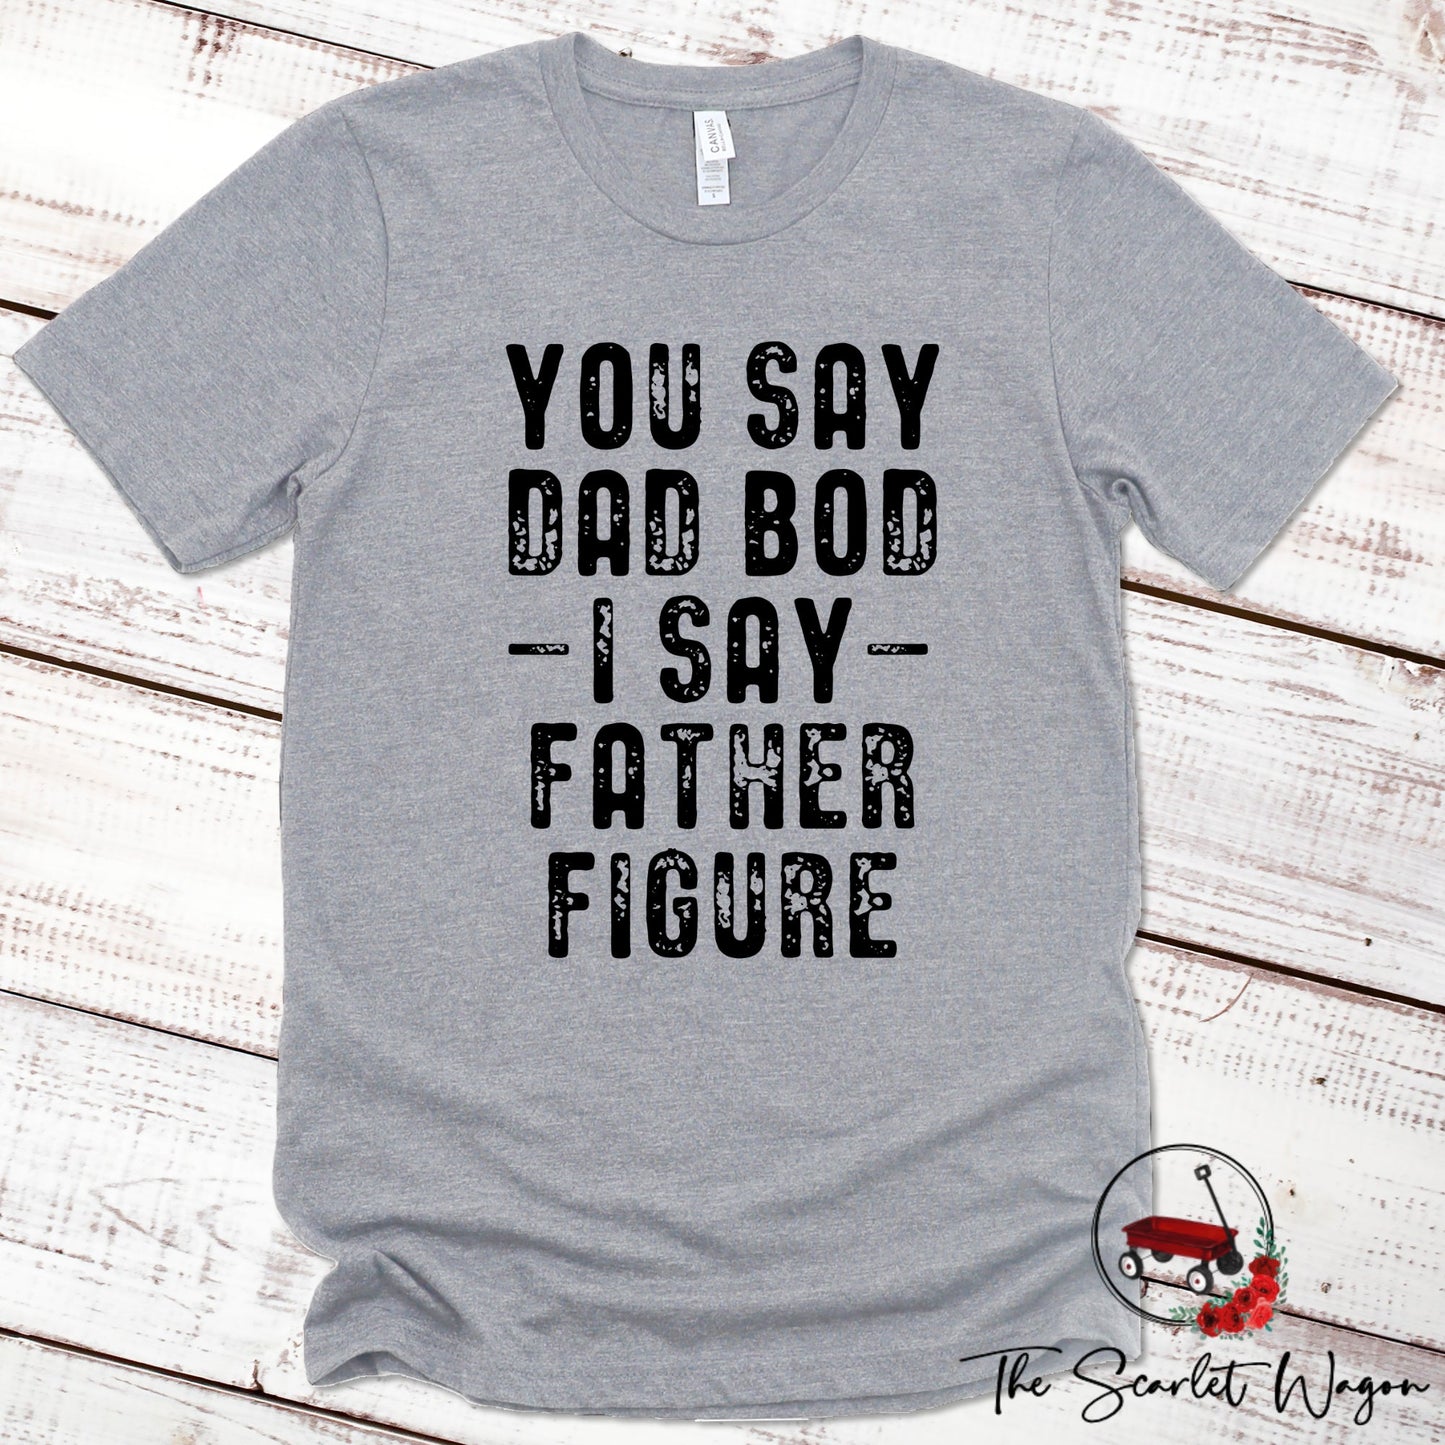 You Say Dad Bod I Say Father Figure Premium Tee Scarlet Wagon Athletic Heather XS 